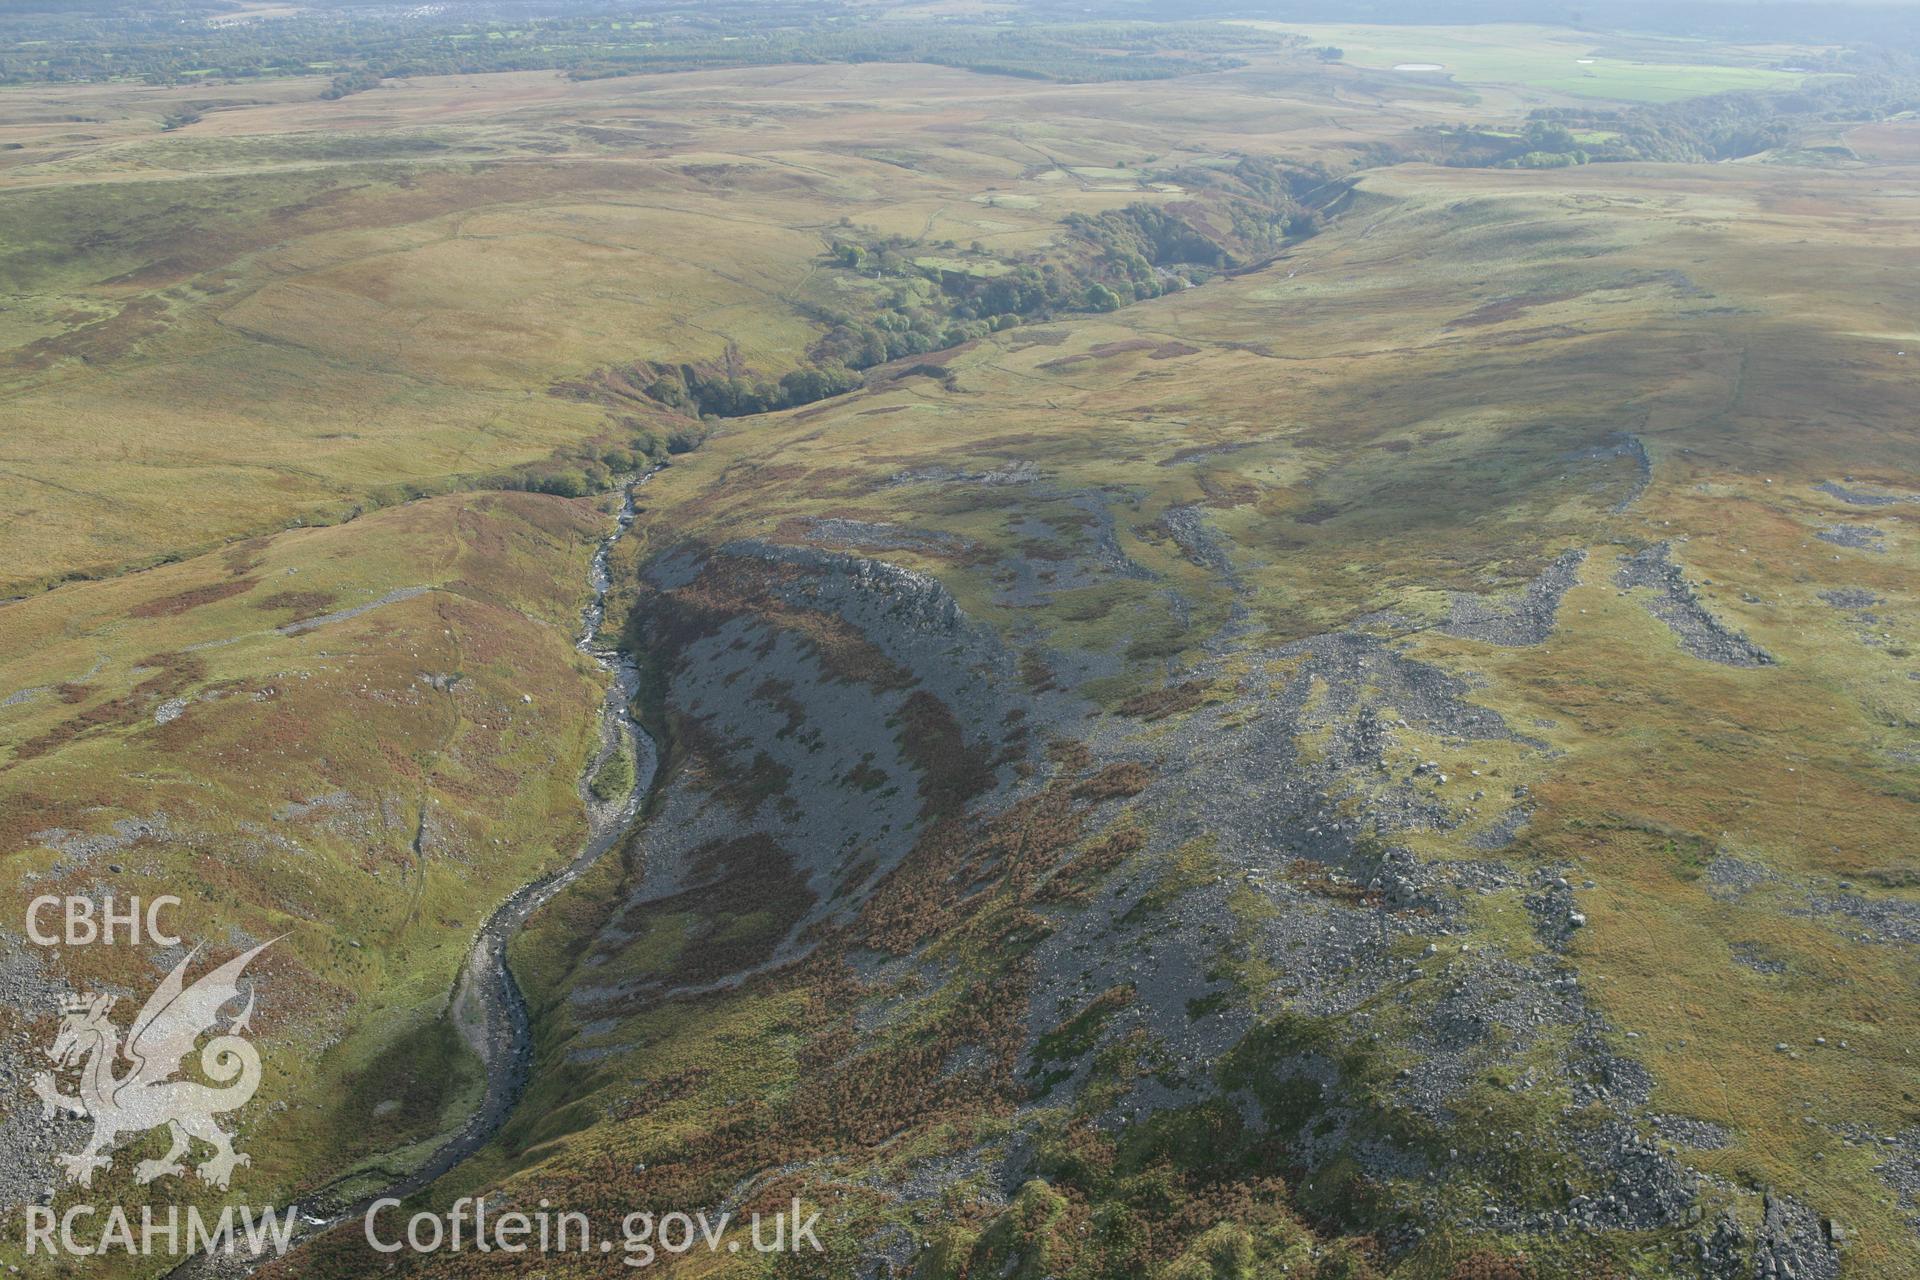 RCAHMW colour oblique aerial photograph of Upper Cwm Twrch Deserted Rural Settlement. Taken on 14 October 2009 by Toby Driver